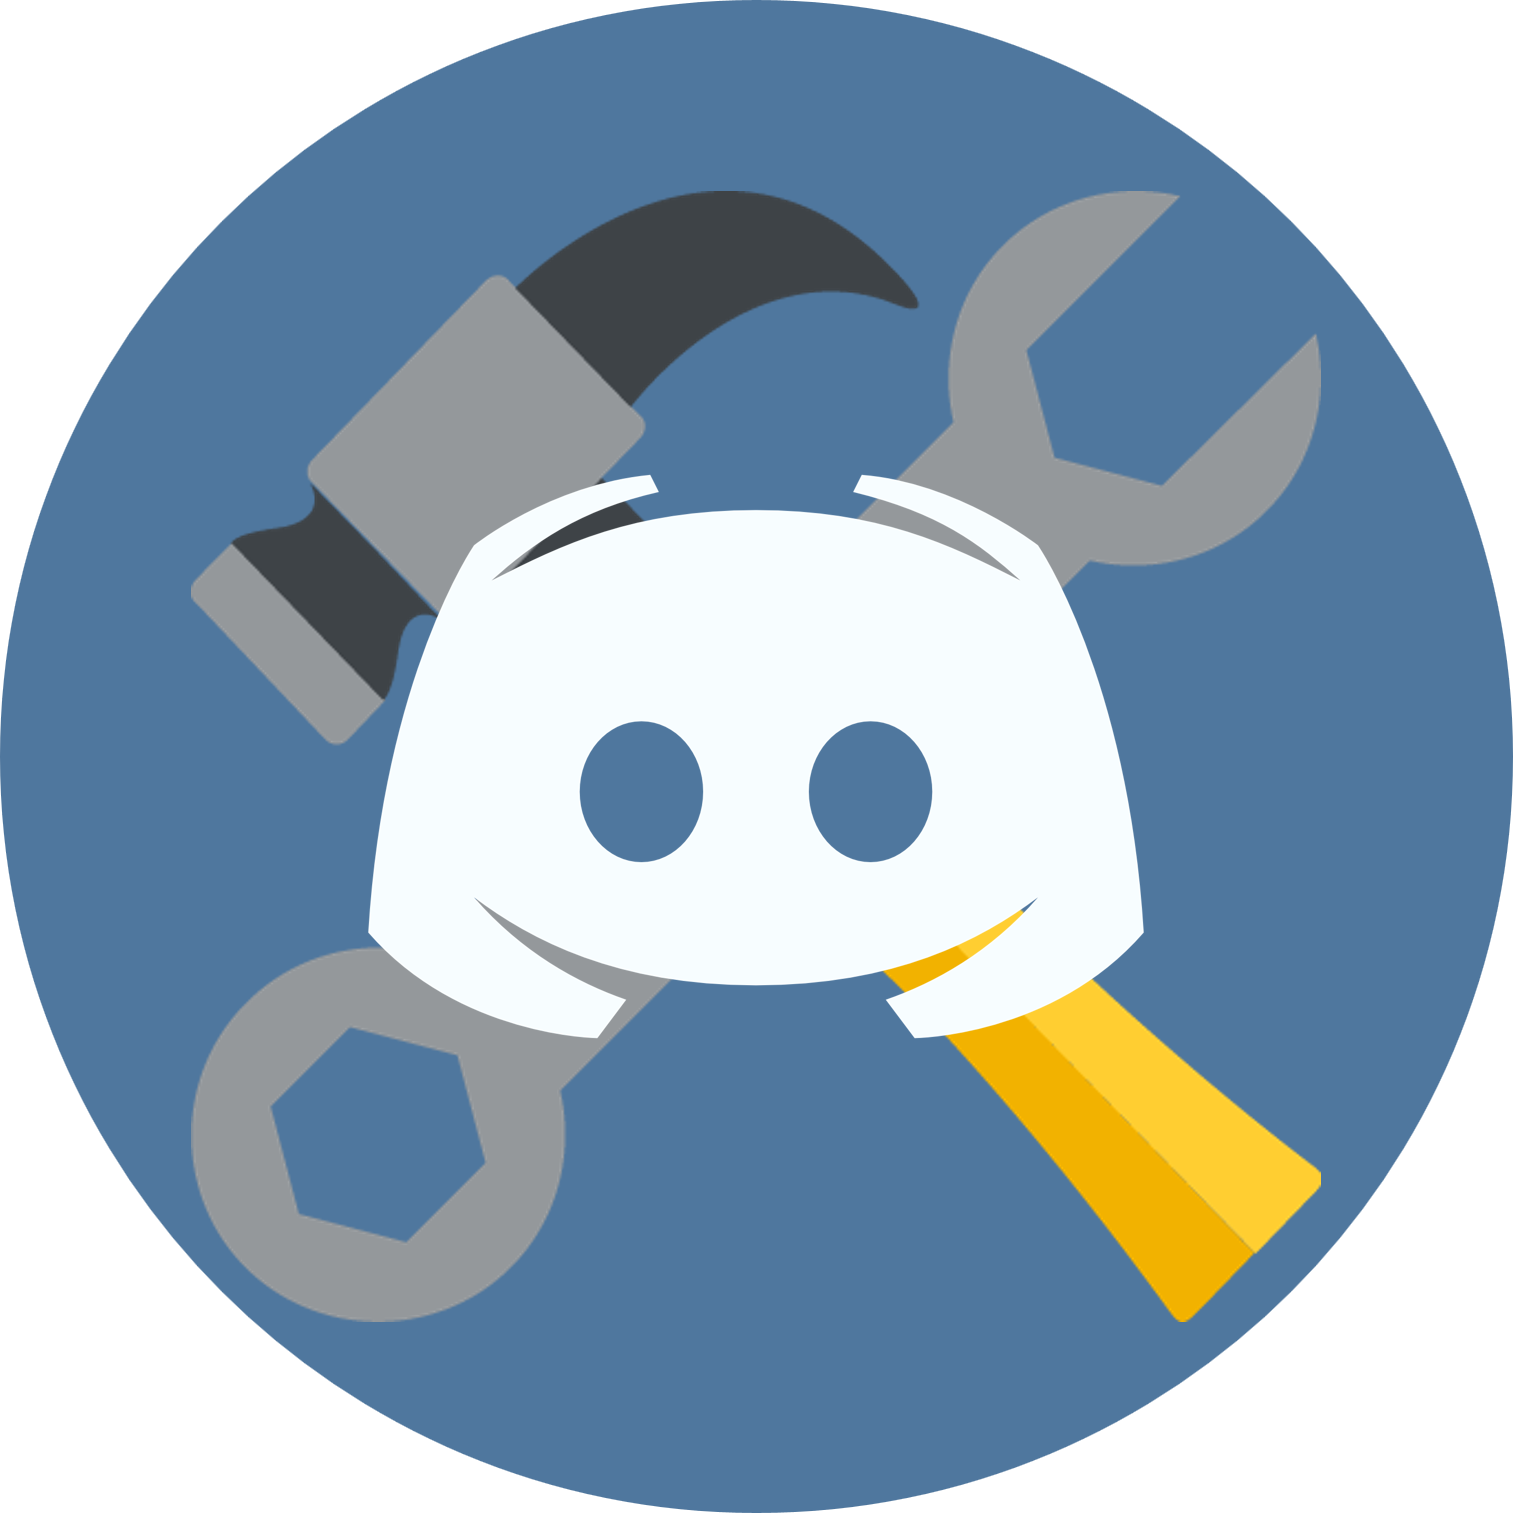 Invite Utils and get stats and info about your discord experience with spee...